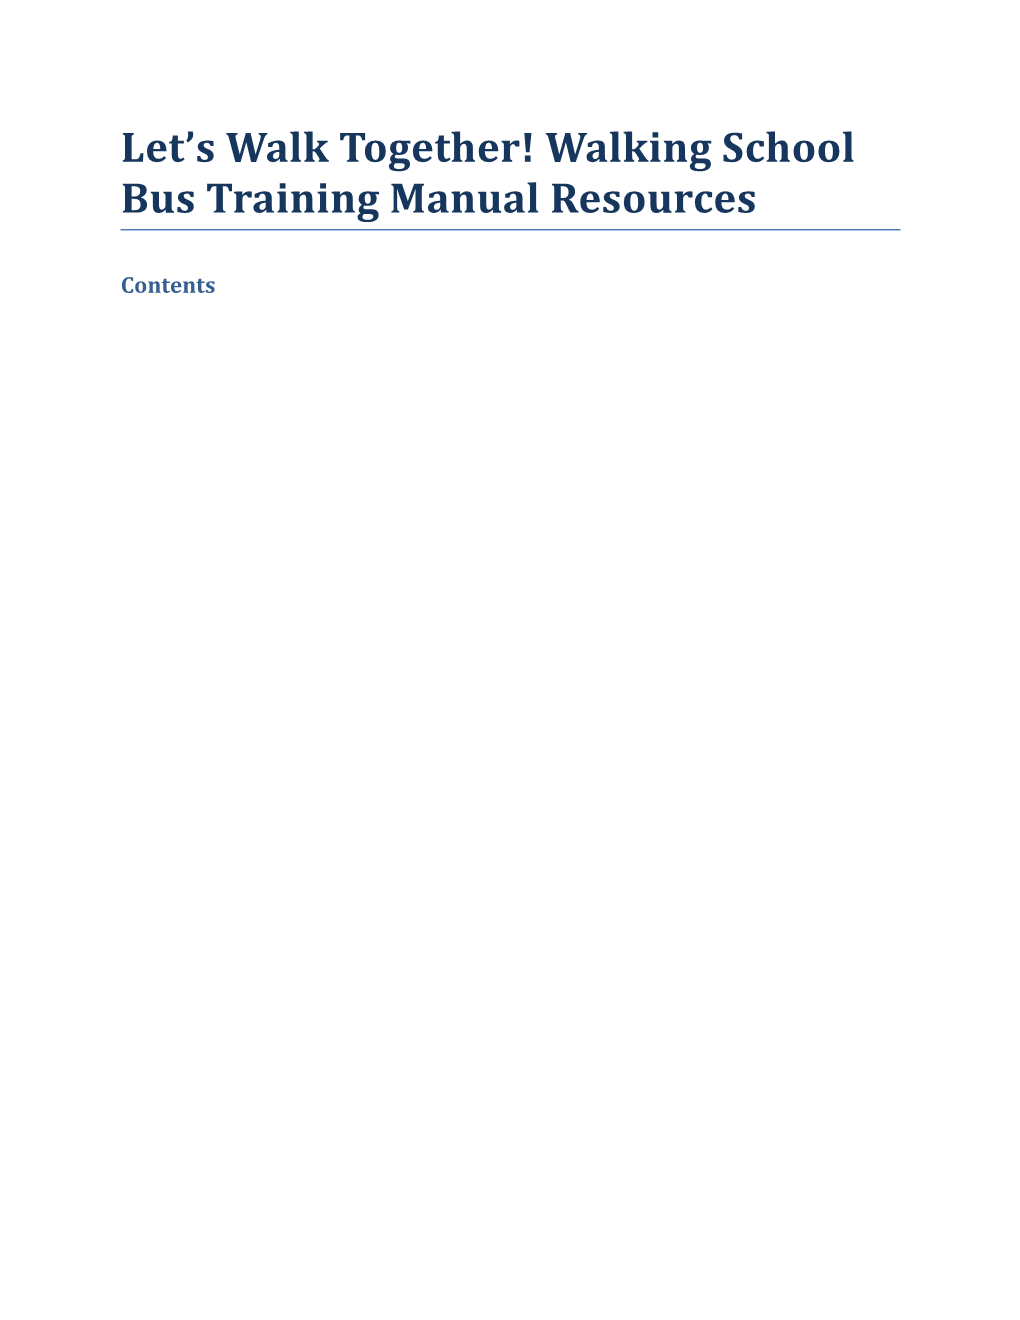 Let S Walk Together! Walking School Bus Training Manual Resources